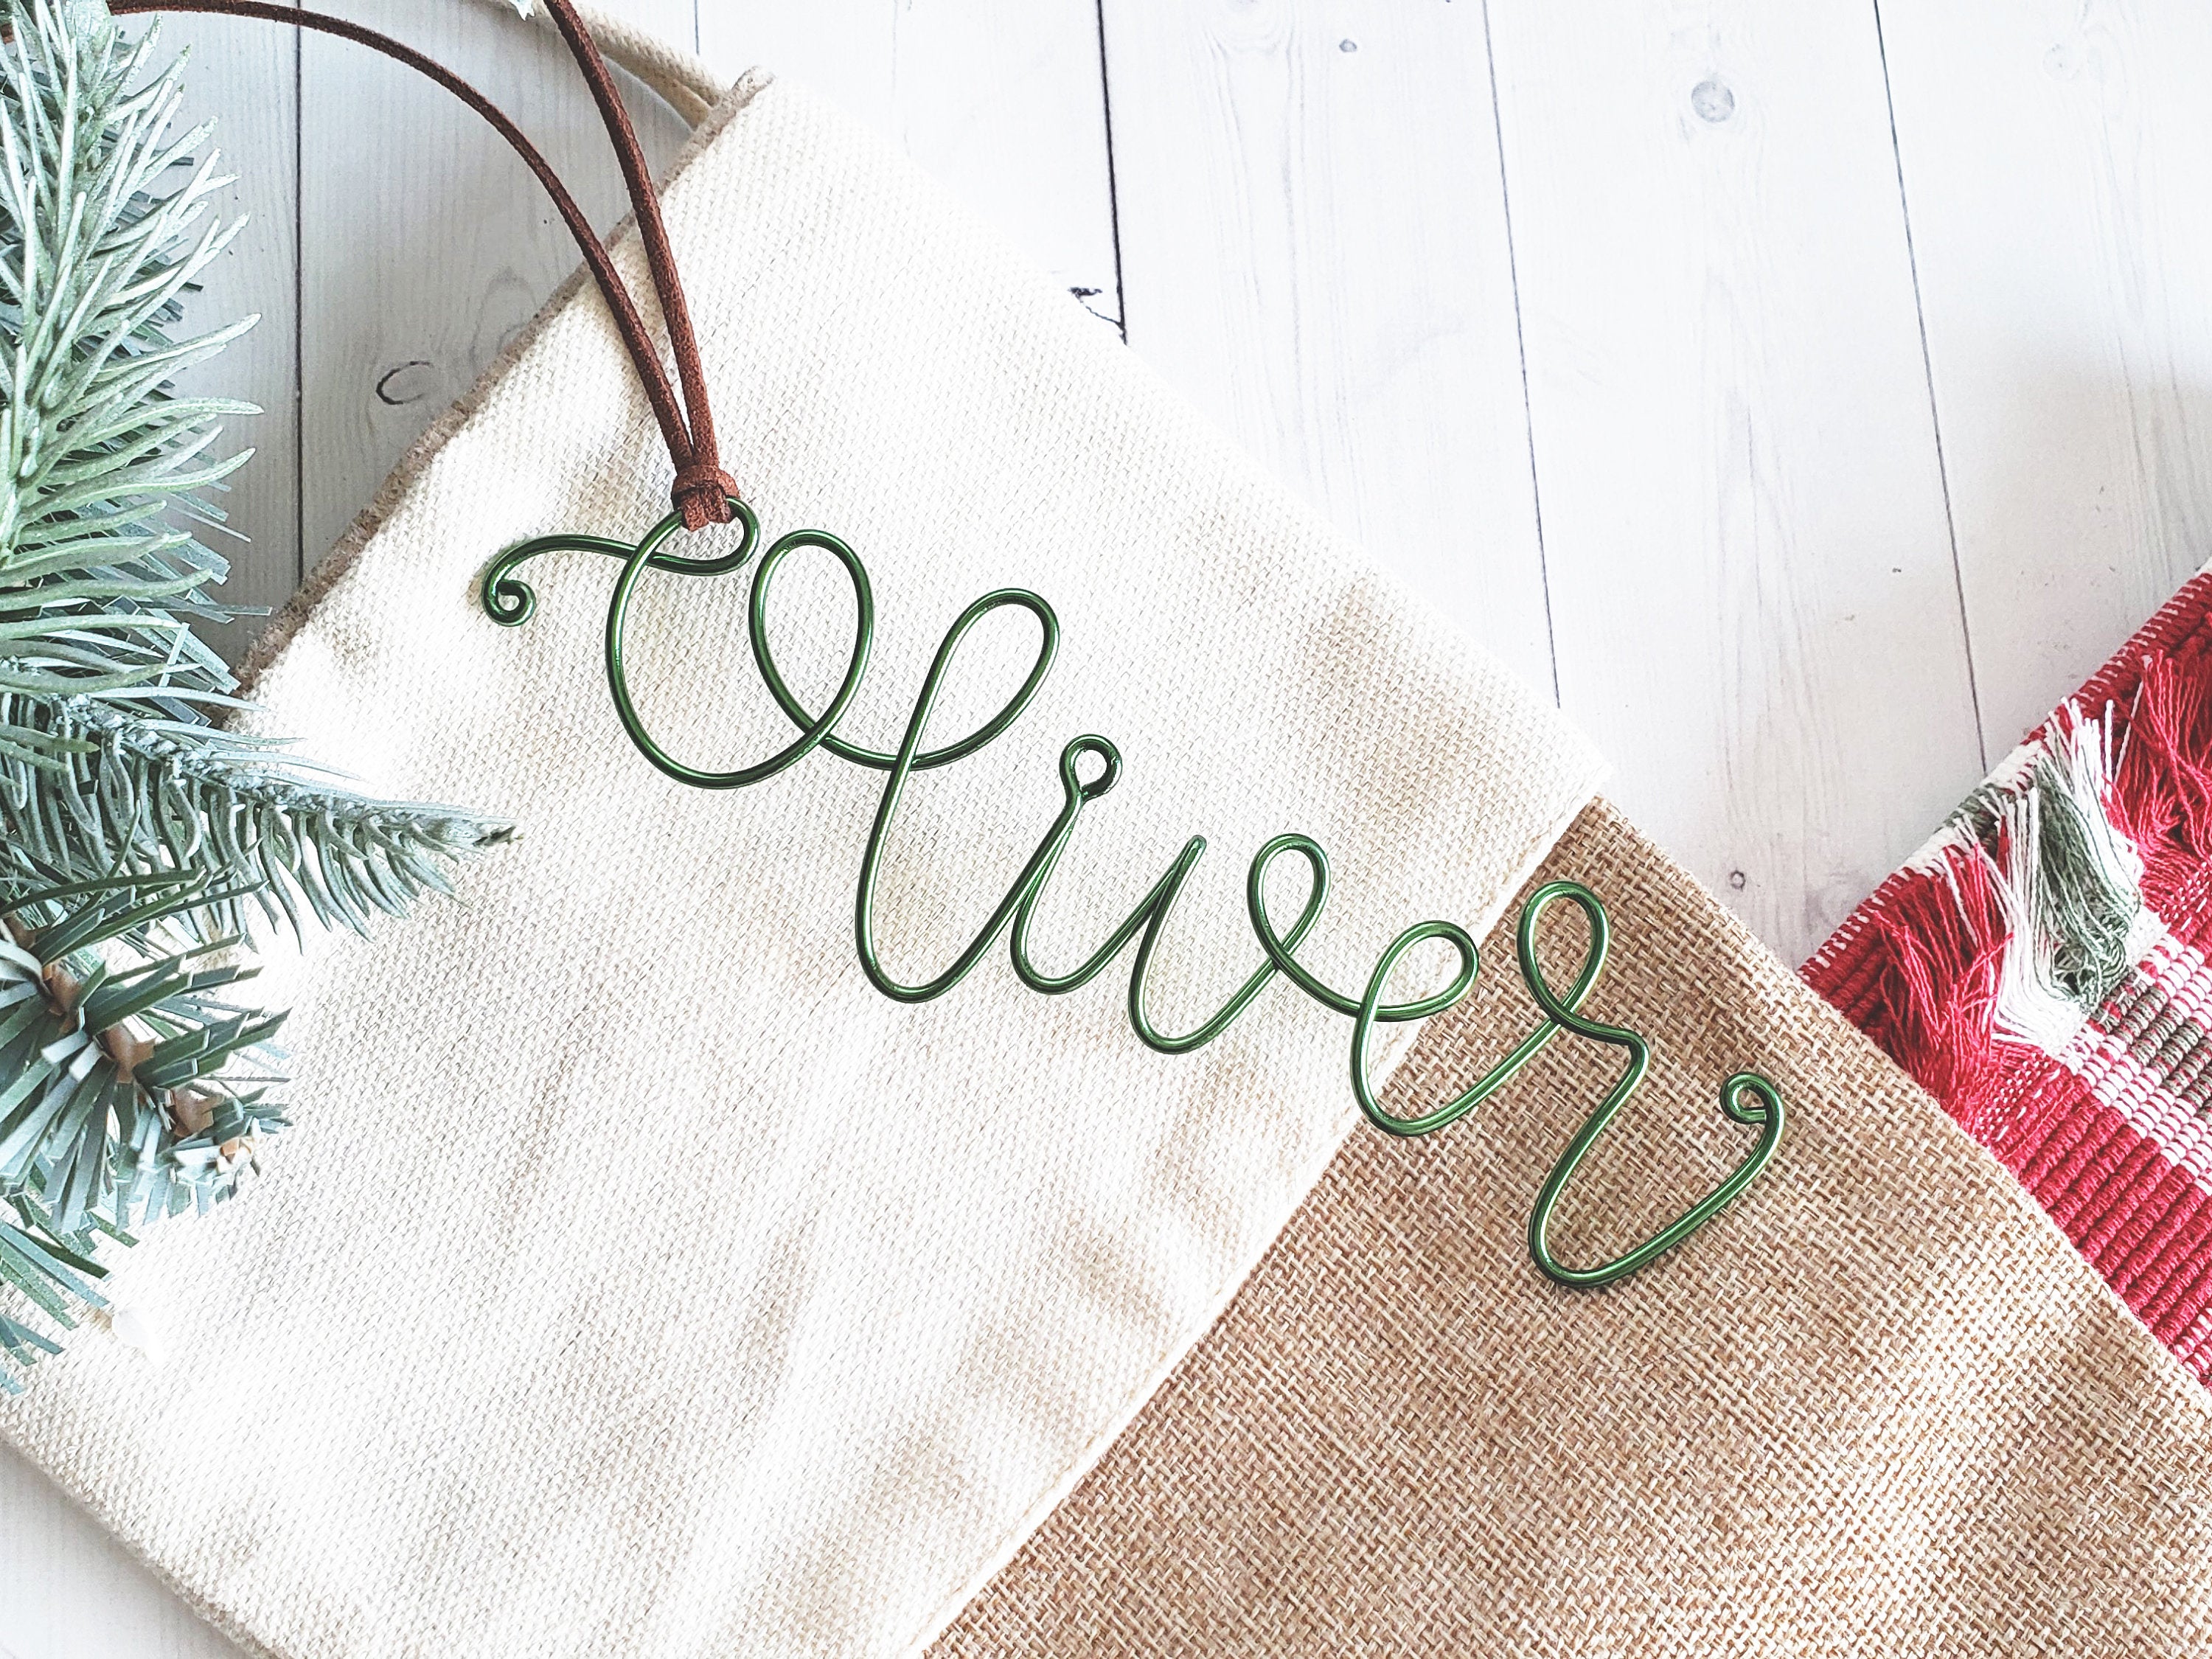 Custom Wire Name Stocking Tag (Oliver) – Le Rustic Chic